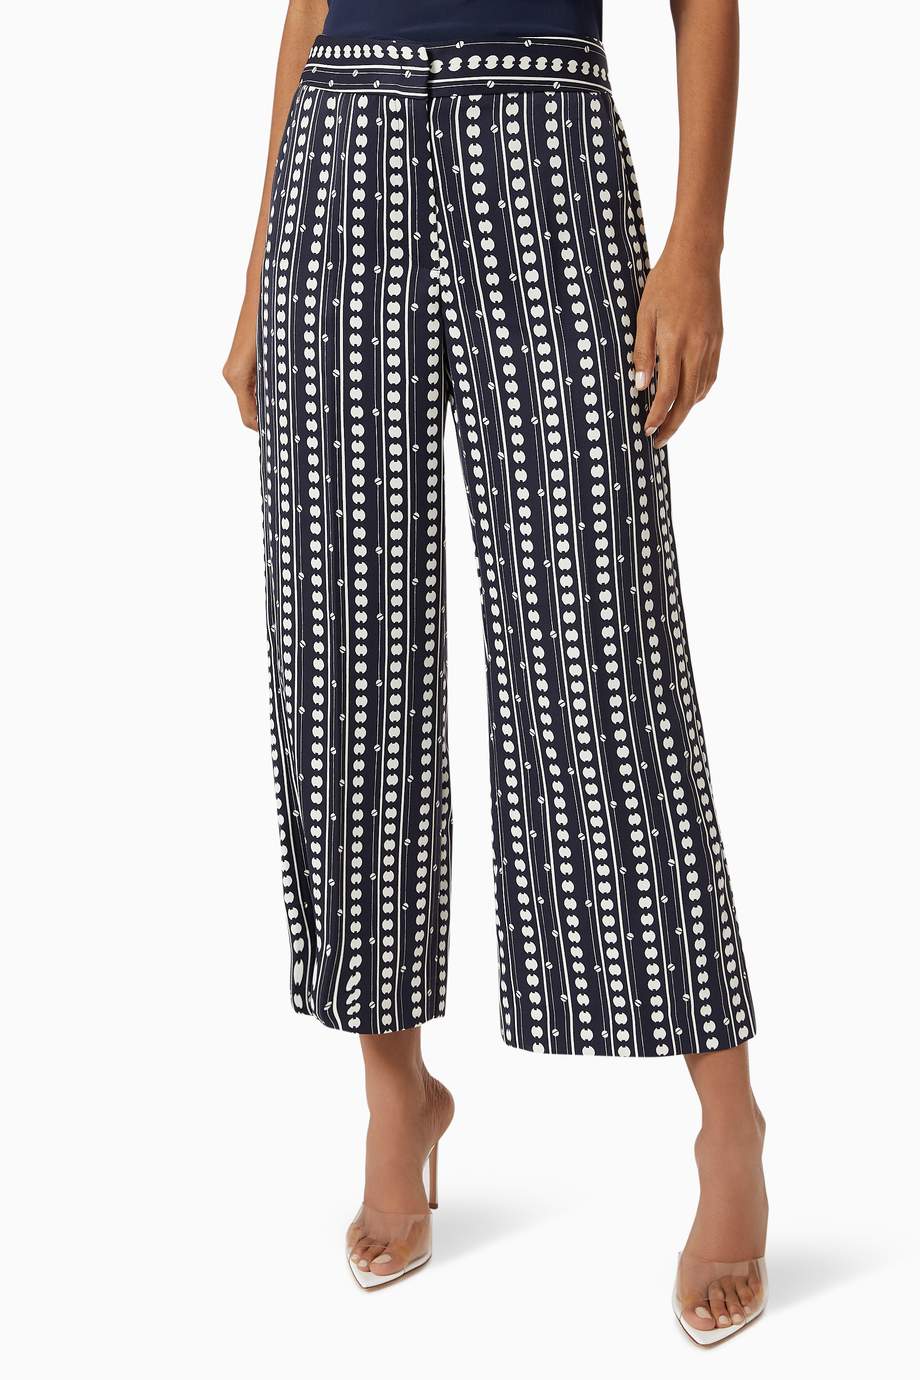 Shop Marella Blue Ione Printed Cropped Pants for Women | Ounass Saudi